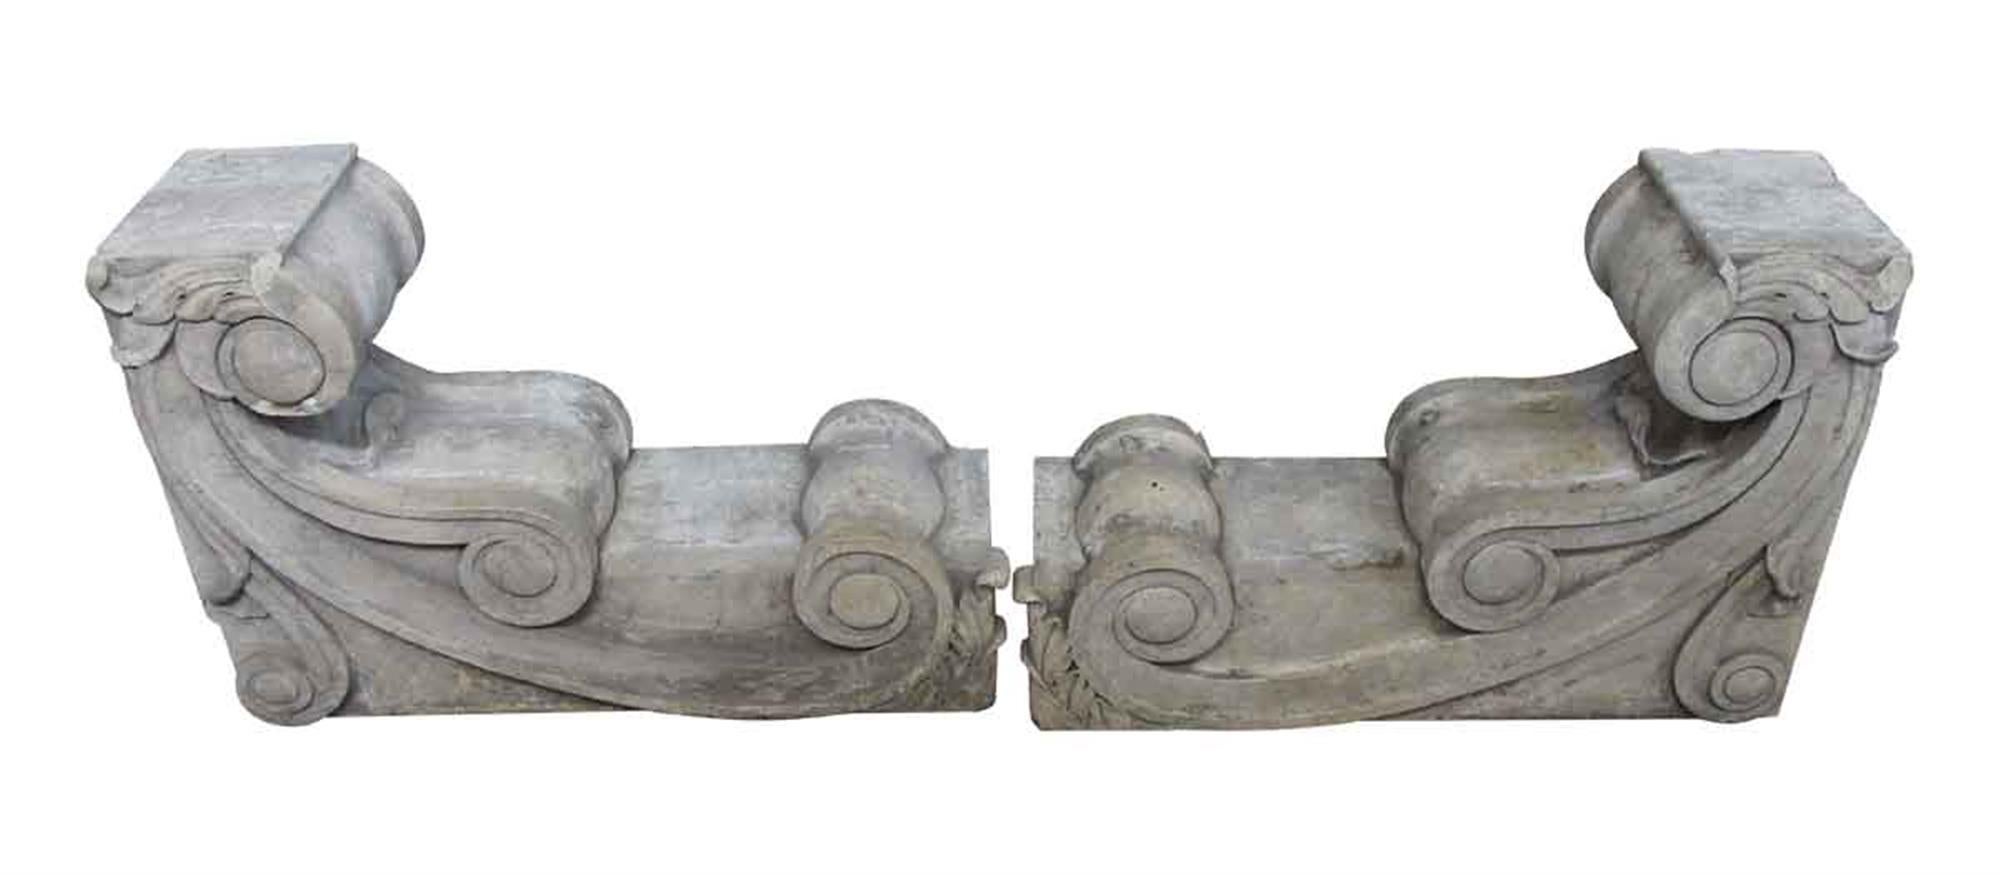 Unique pair of 1910 carved stone corbels. Priced as a pair. These can be seen at our 400 Gilligan St location in Scranton, PA.